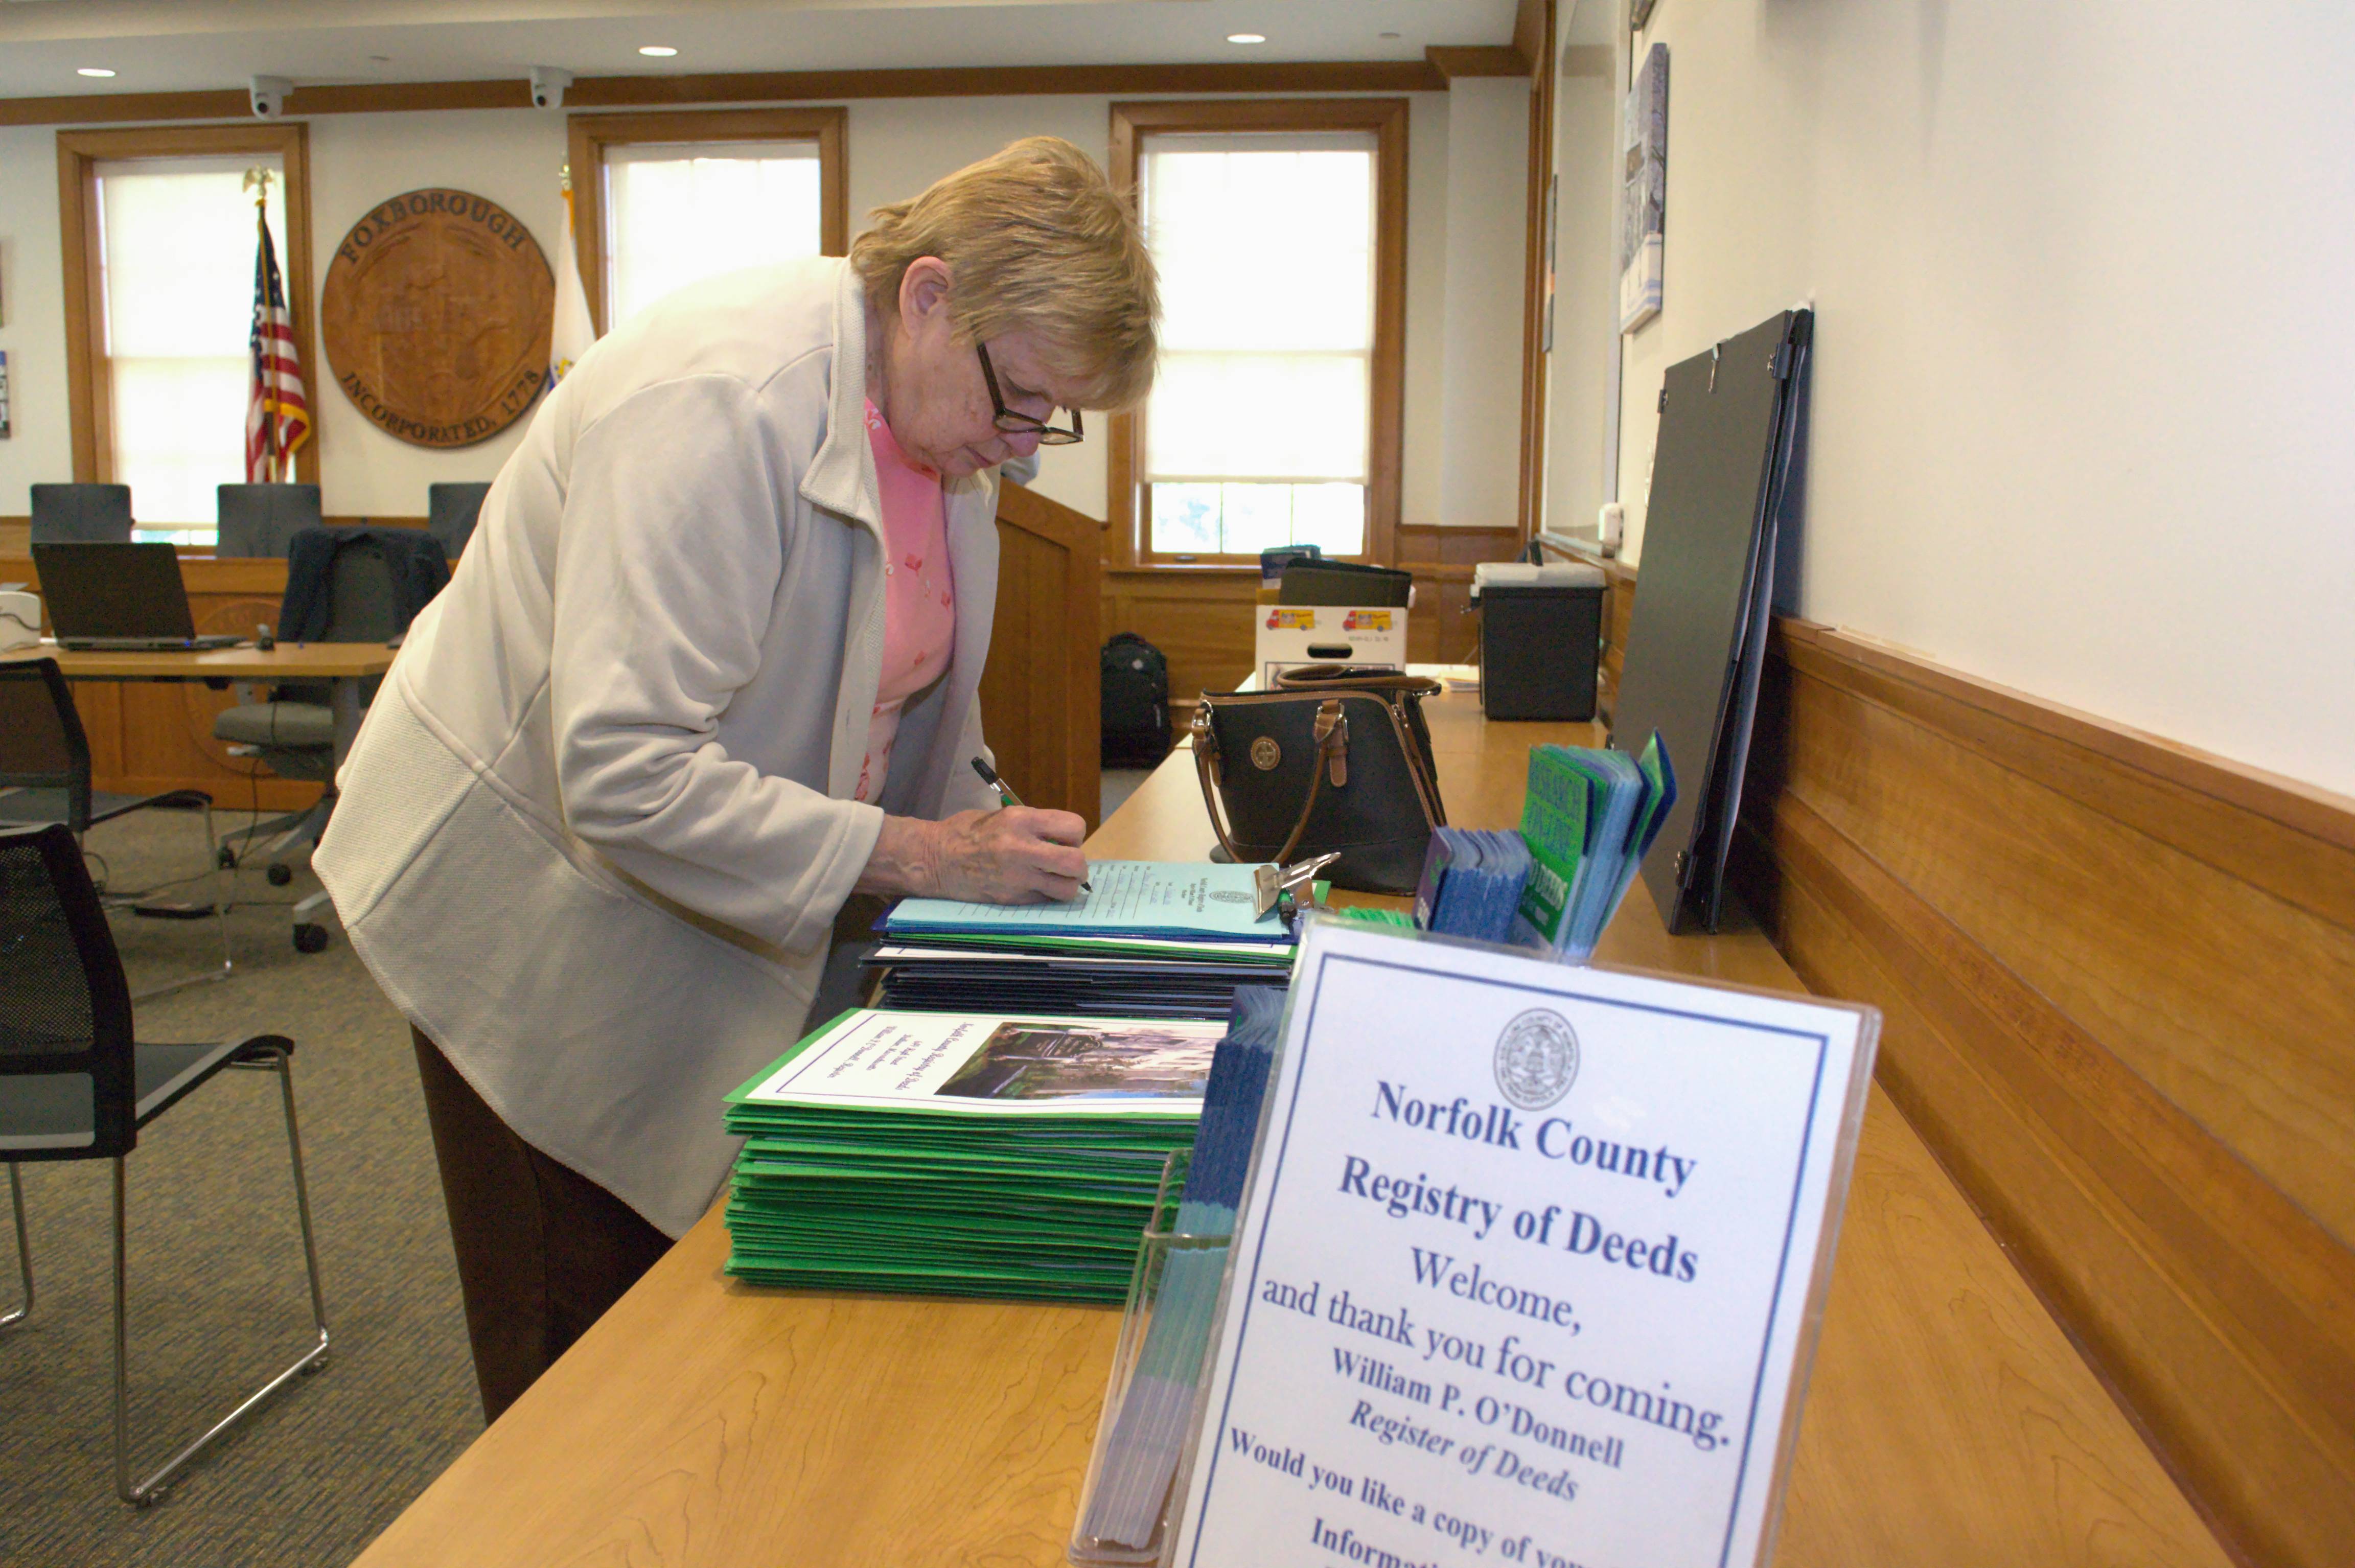 Norfolk County Register of Deeds Visits Foxborough Town Hall